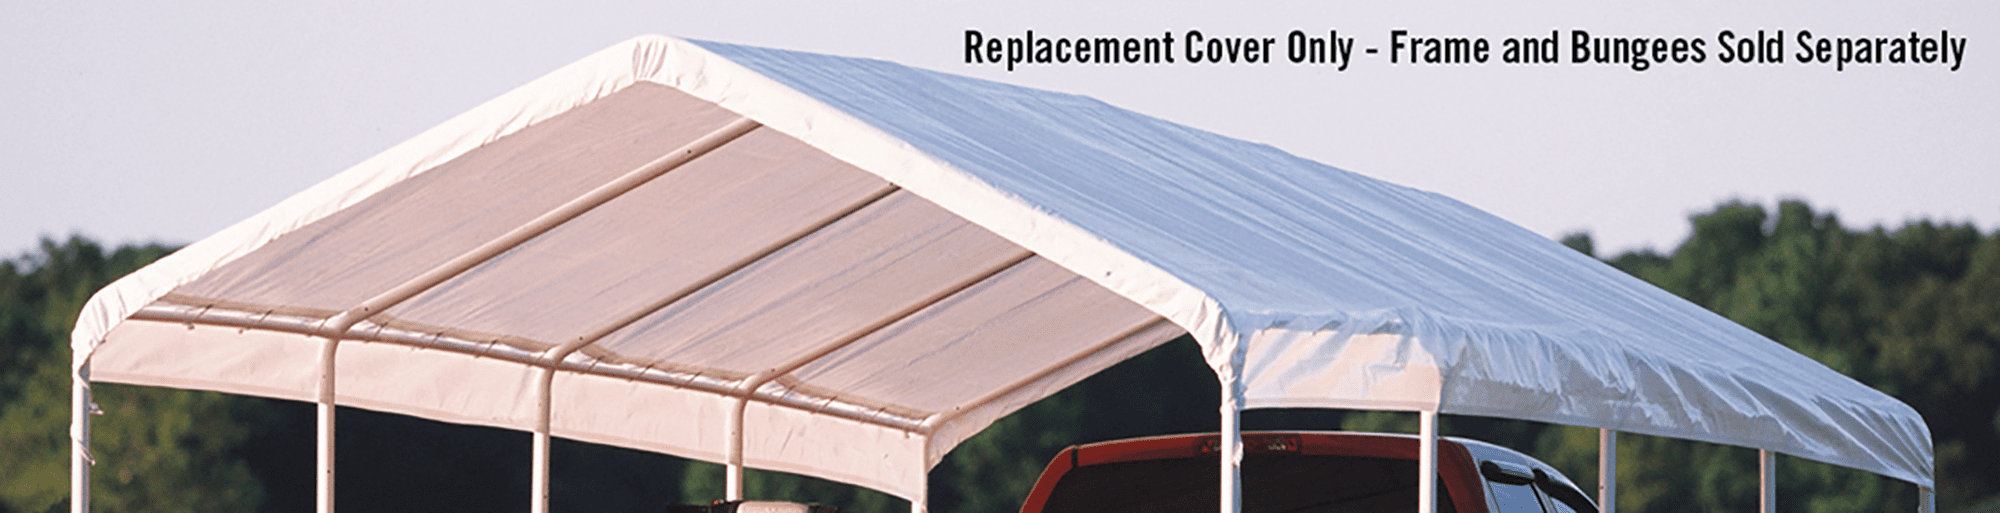 Shelterlogic 12' x 26' White Canopy Replacement Cover Fits 2